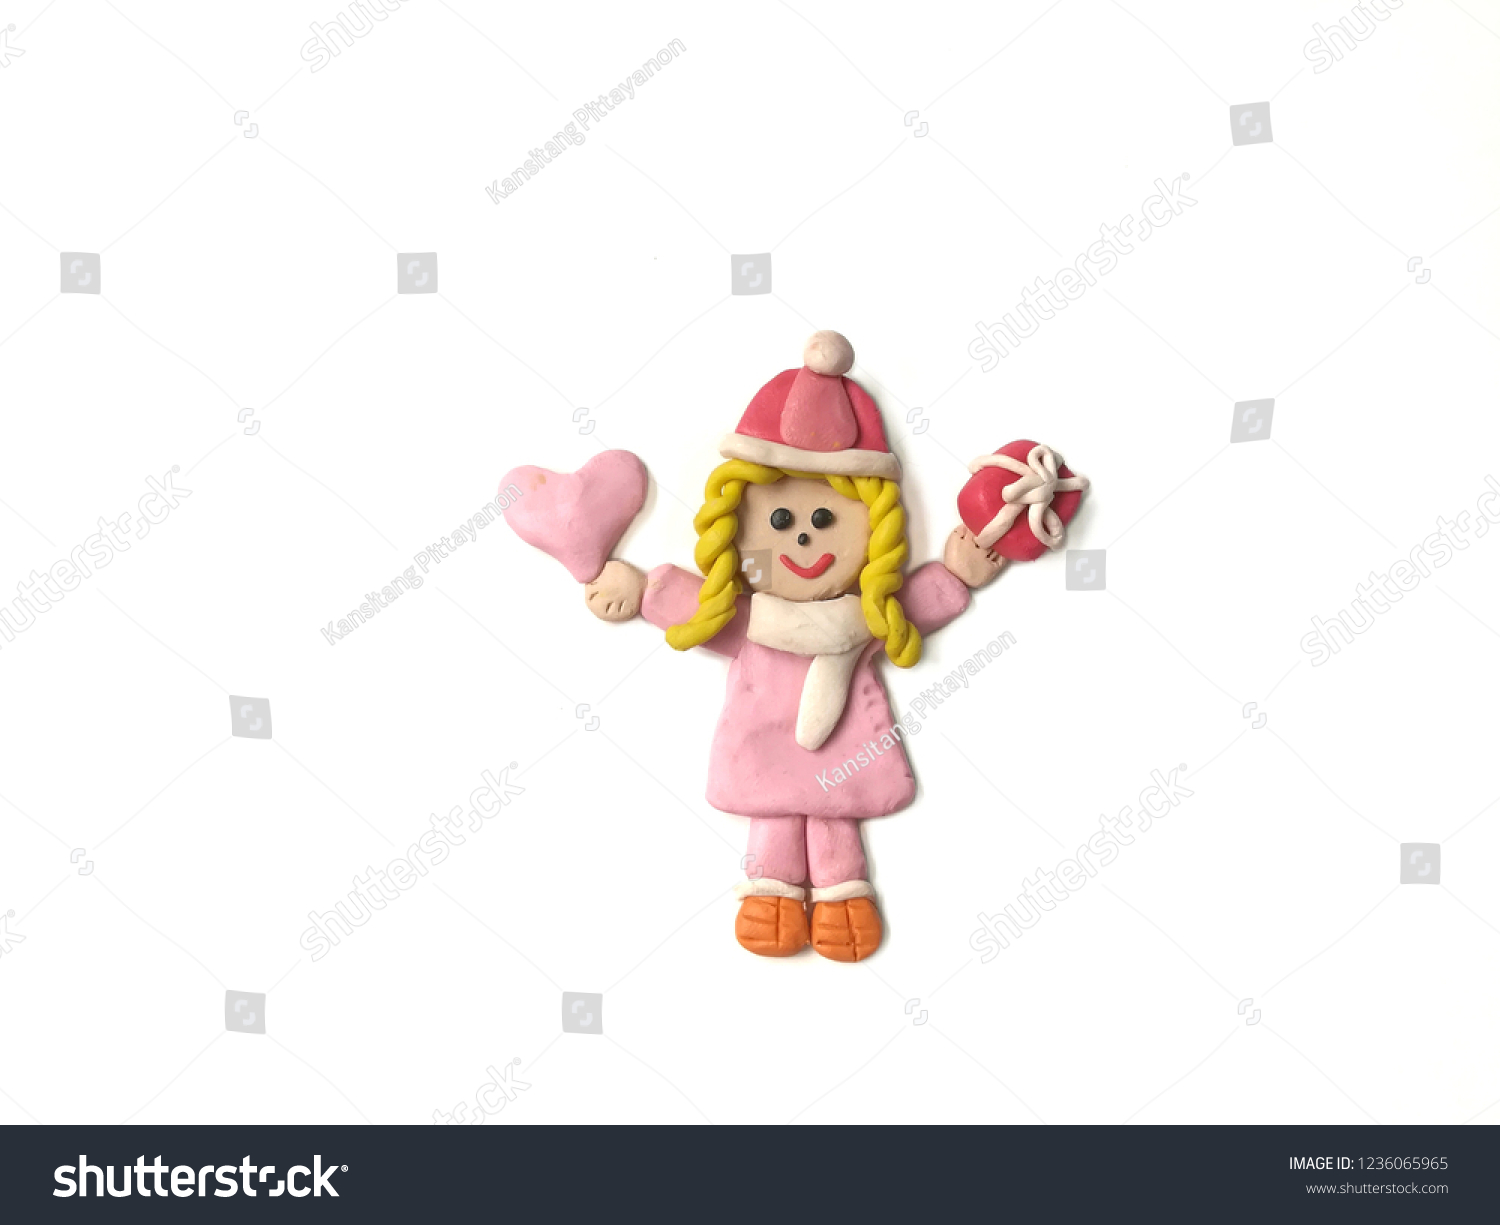 Pretty girl holding the pink heart and red gift box made from plasticine clay placed on white background, cute child dough wearing a coat in winter festival #1236065965